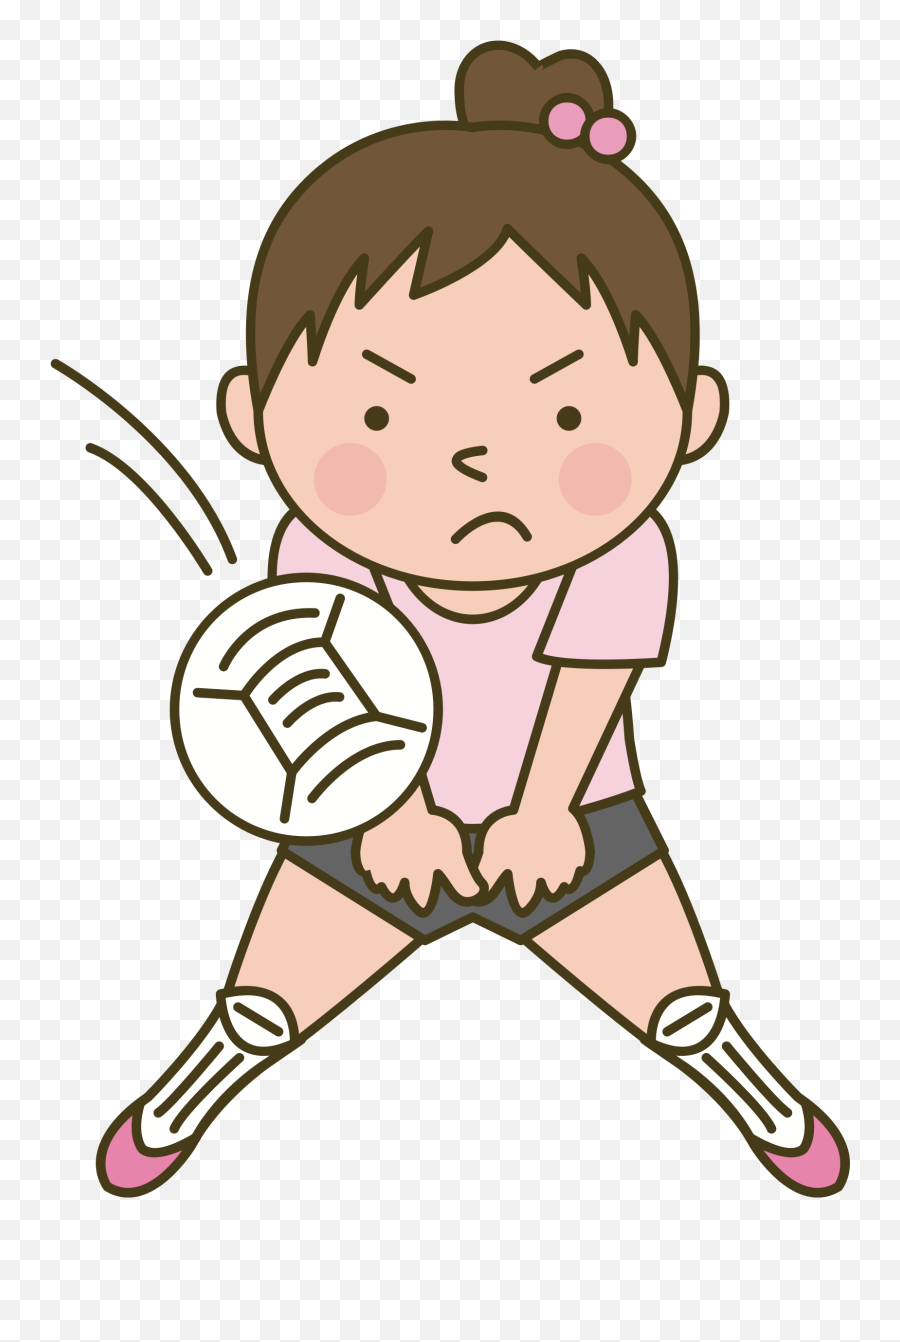 Download Hd Volleyball Png Image - Cartoon Transparent Emoji,Volleyball Player Png